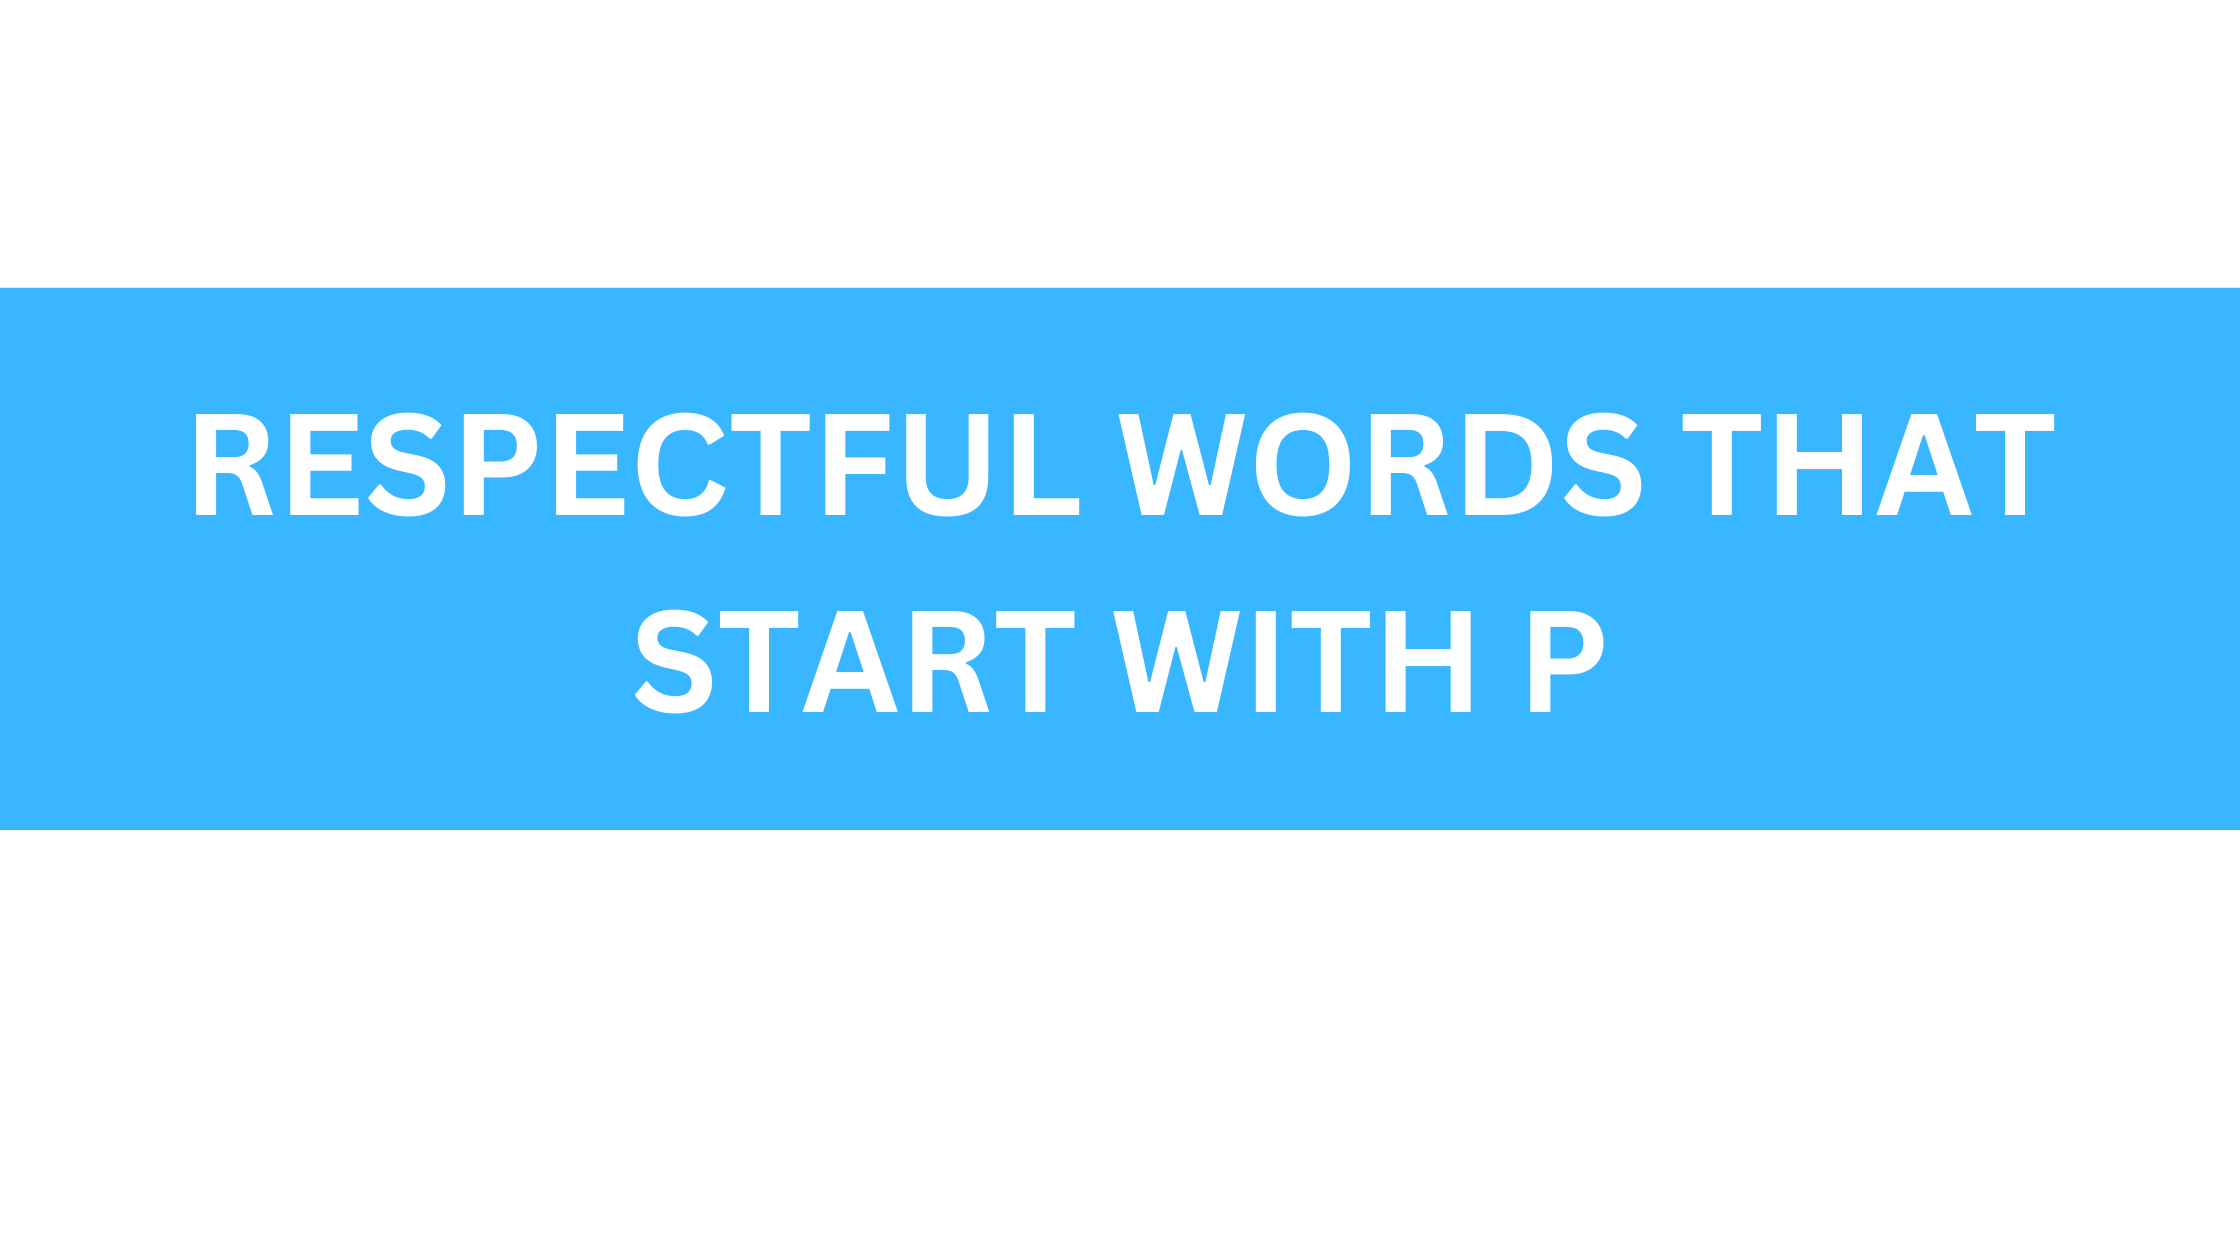 respectful words that start with p